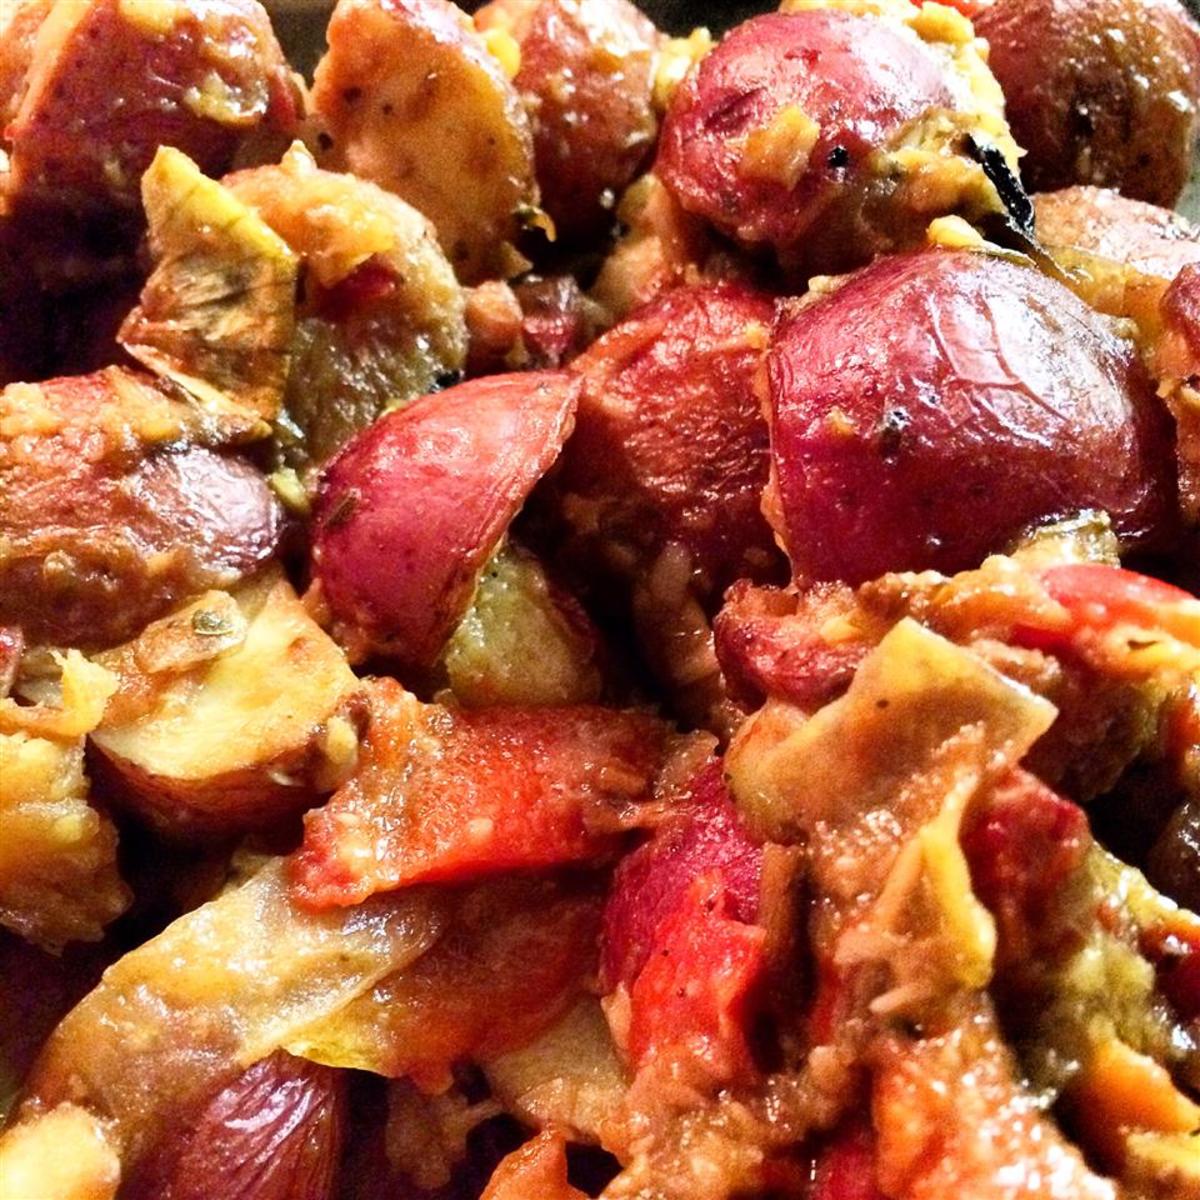 A simple, delicious recipe with basically 5 ingredients: red potatoes, red peppers, garlic, balsamic vinegar, and olive oil. Fantastic at the summer barbecue and so welcome at potluck feasts or family dinners!